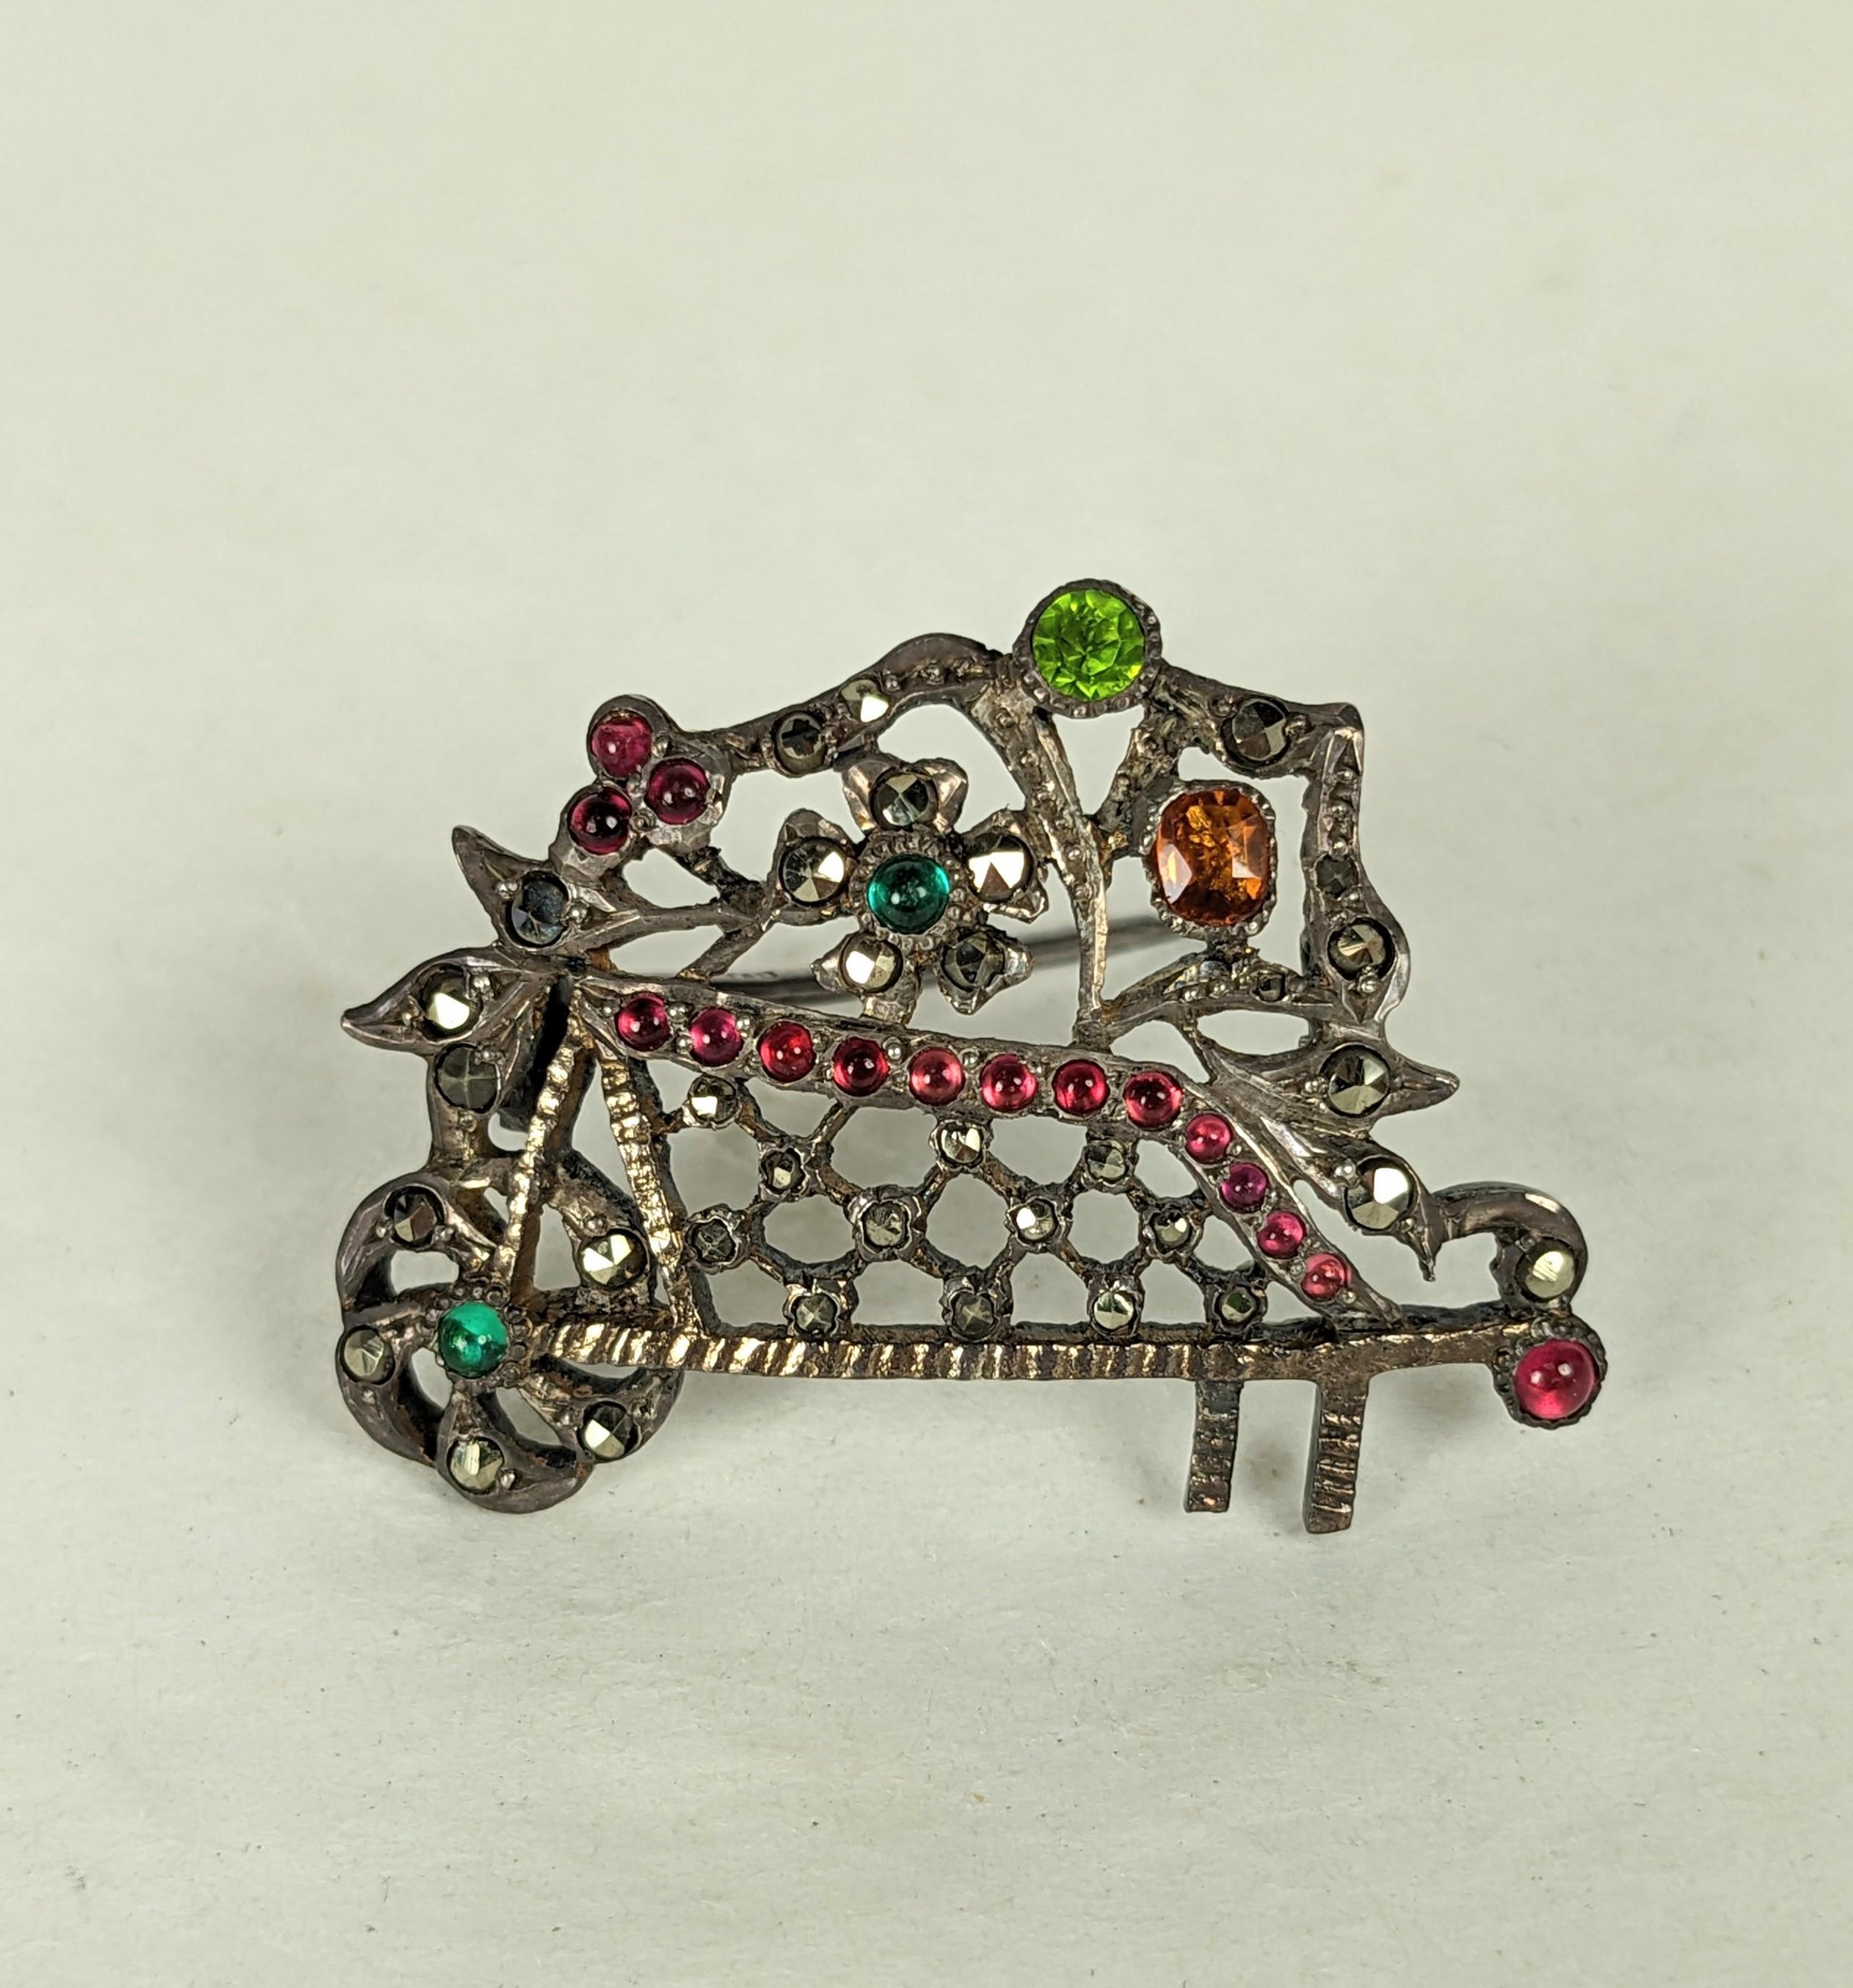 Charming Victorian French Flower Cart Brooch from the mid 19th Century, France. Completely handmade in heavy gauge sterling with colored pastes. 1850's France. 1.25